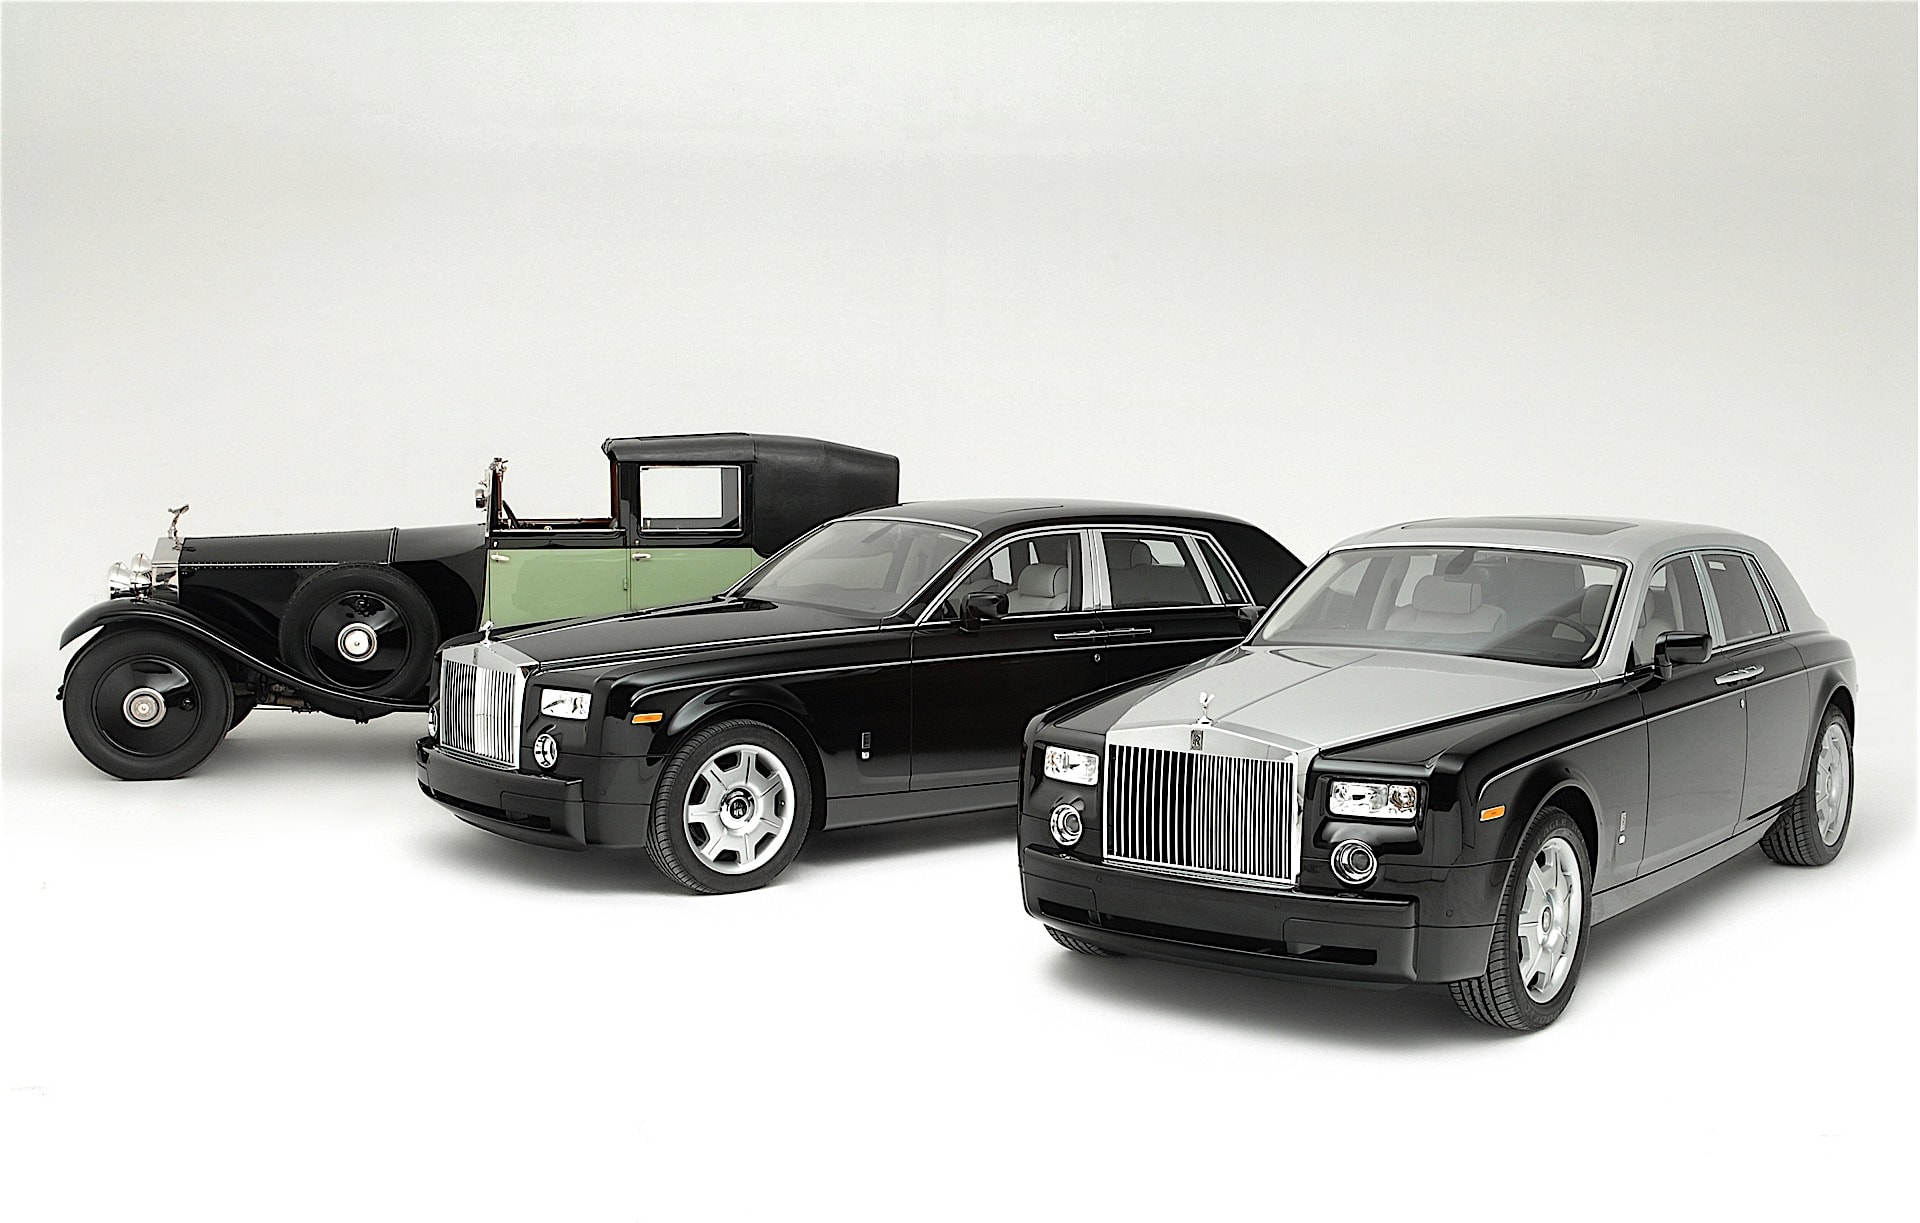 THE HISTORY OF THE ROLLS-ROYCE GHOST